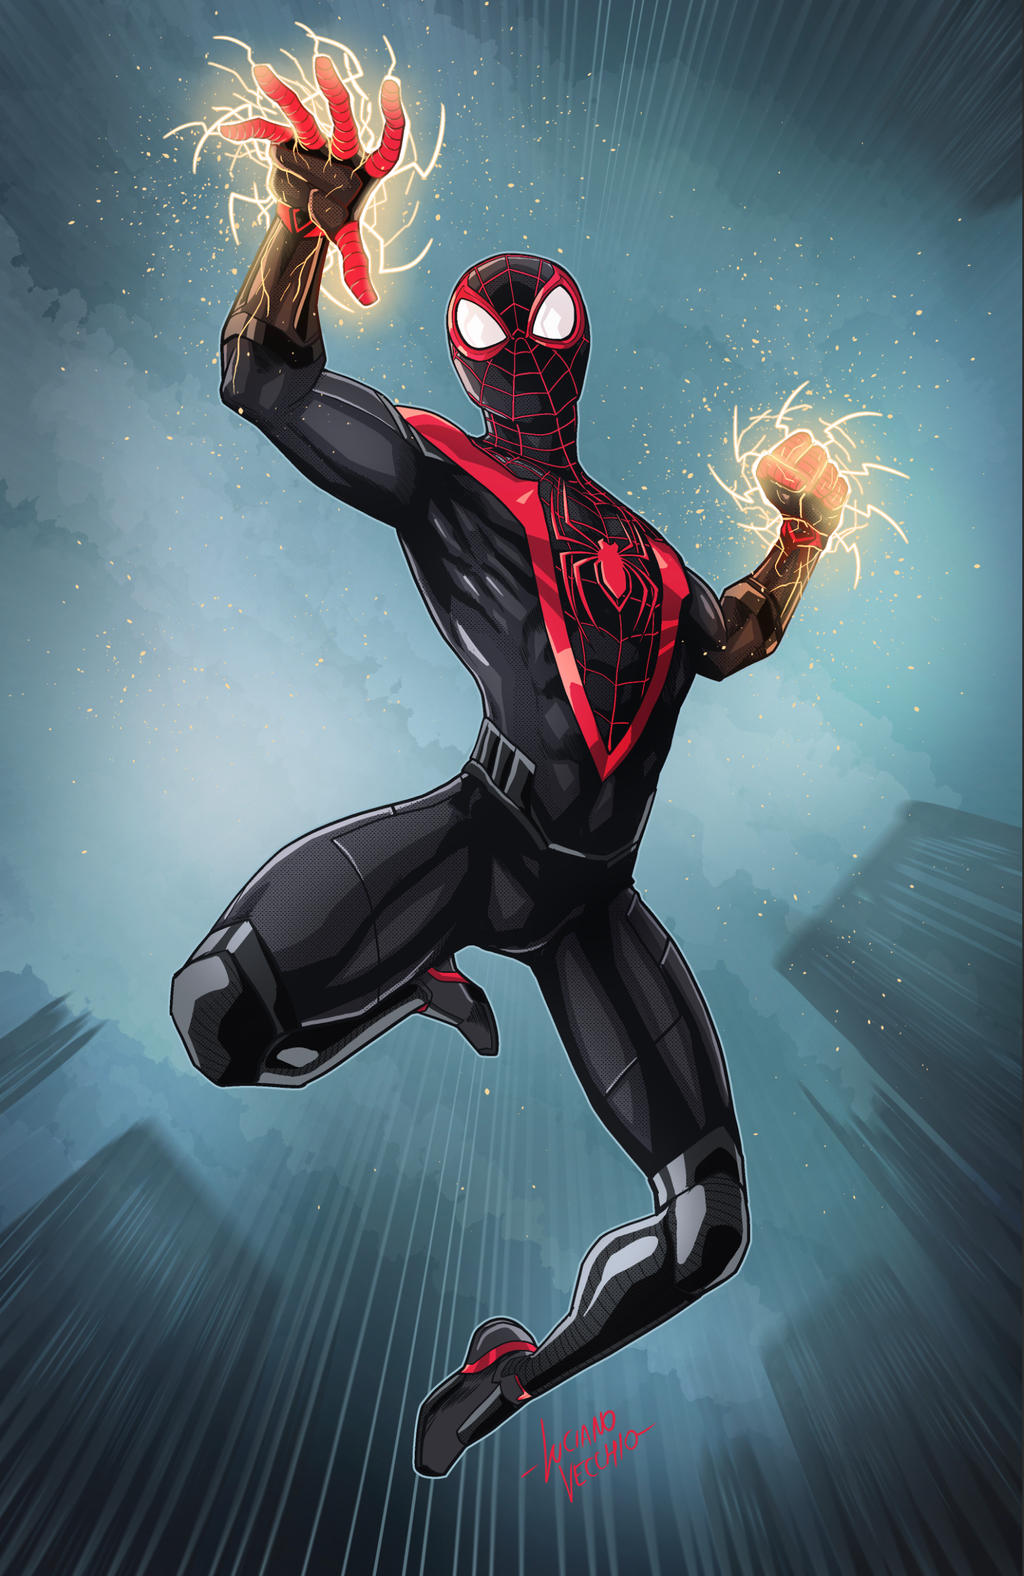 Ps5 Spiderman Miles Morales By Lucianovecchio On Deviantart